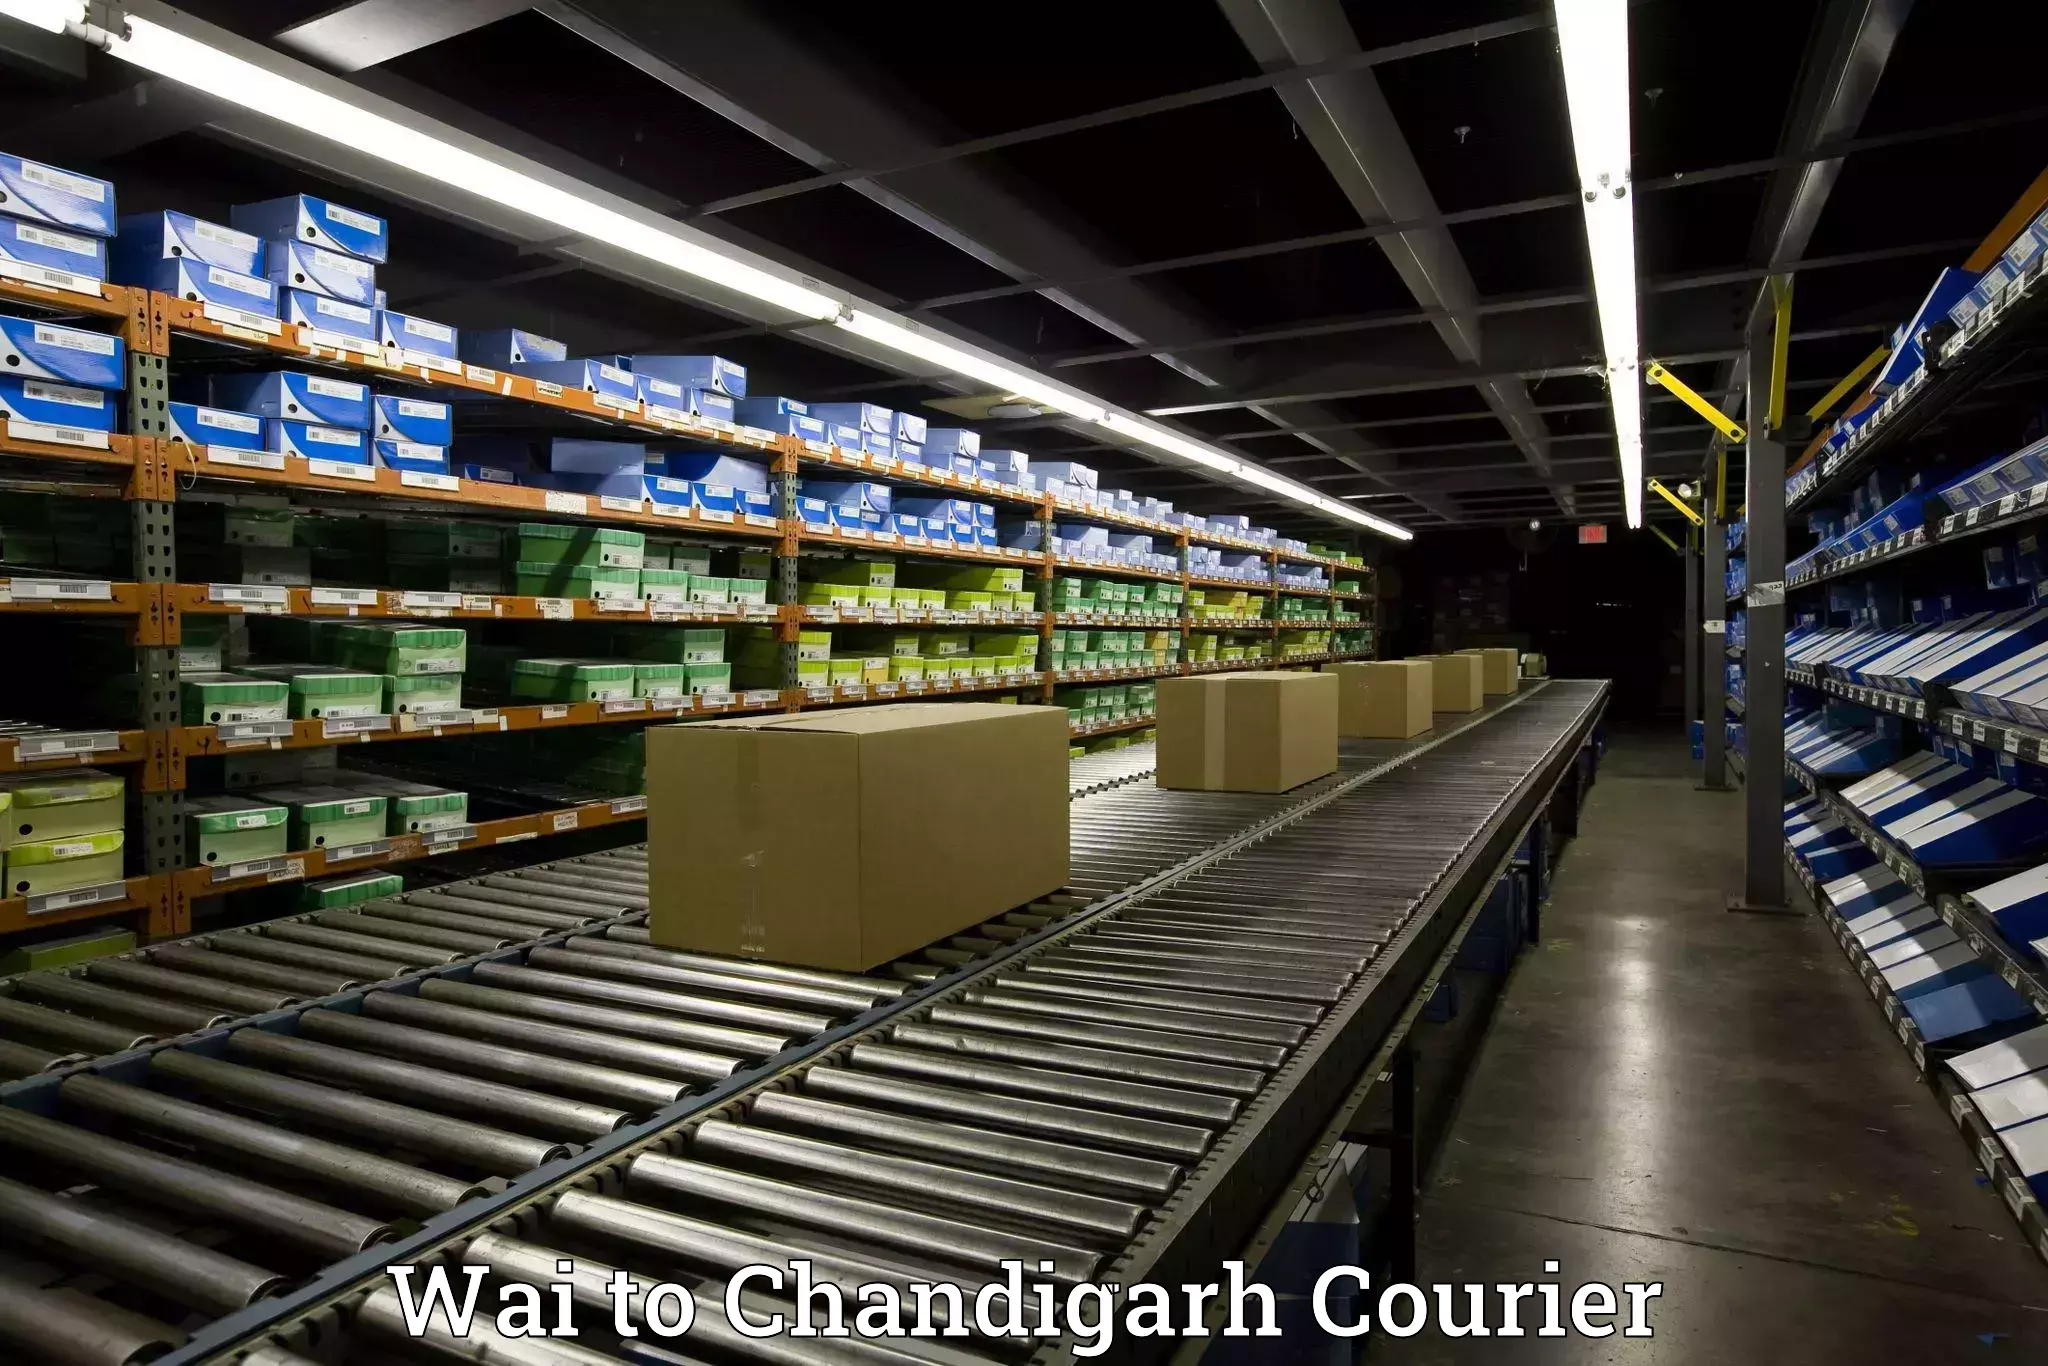 Quality moving and storage in Wai to Chandigarh